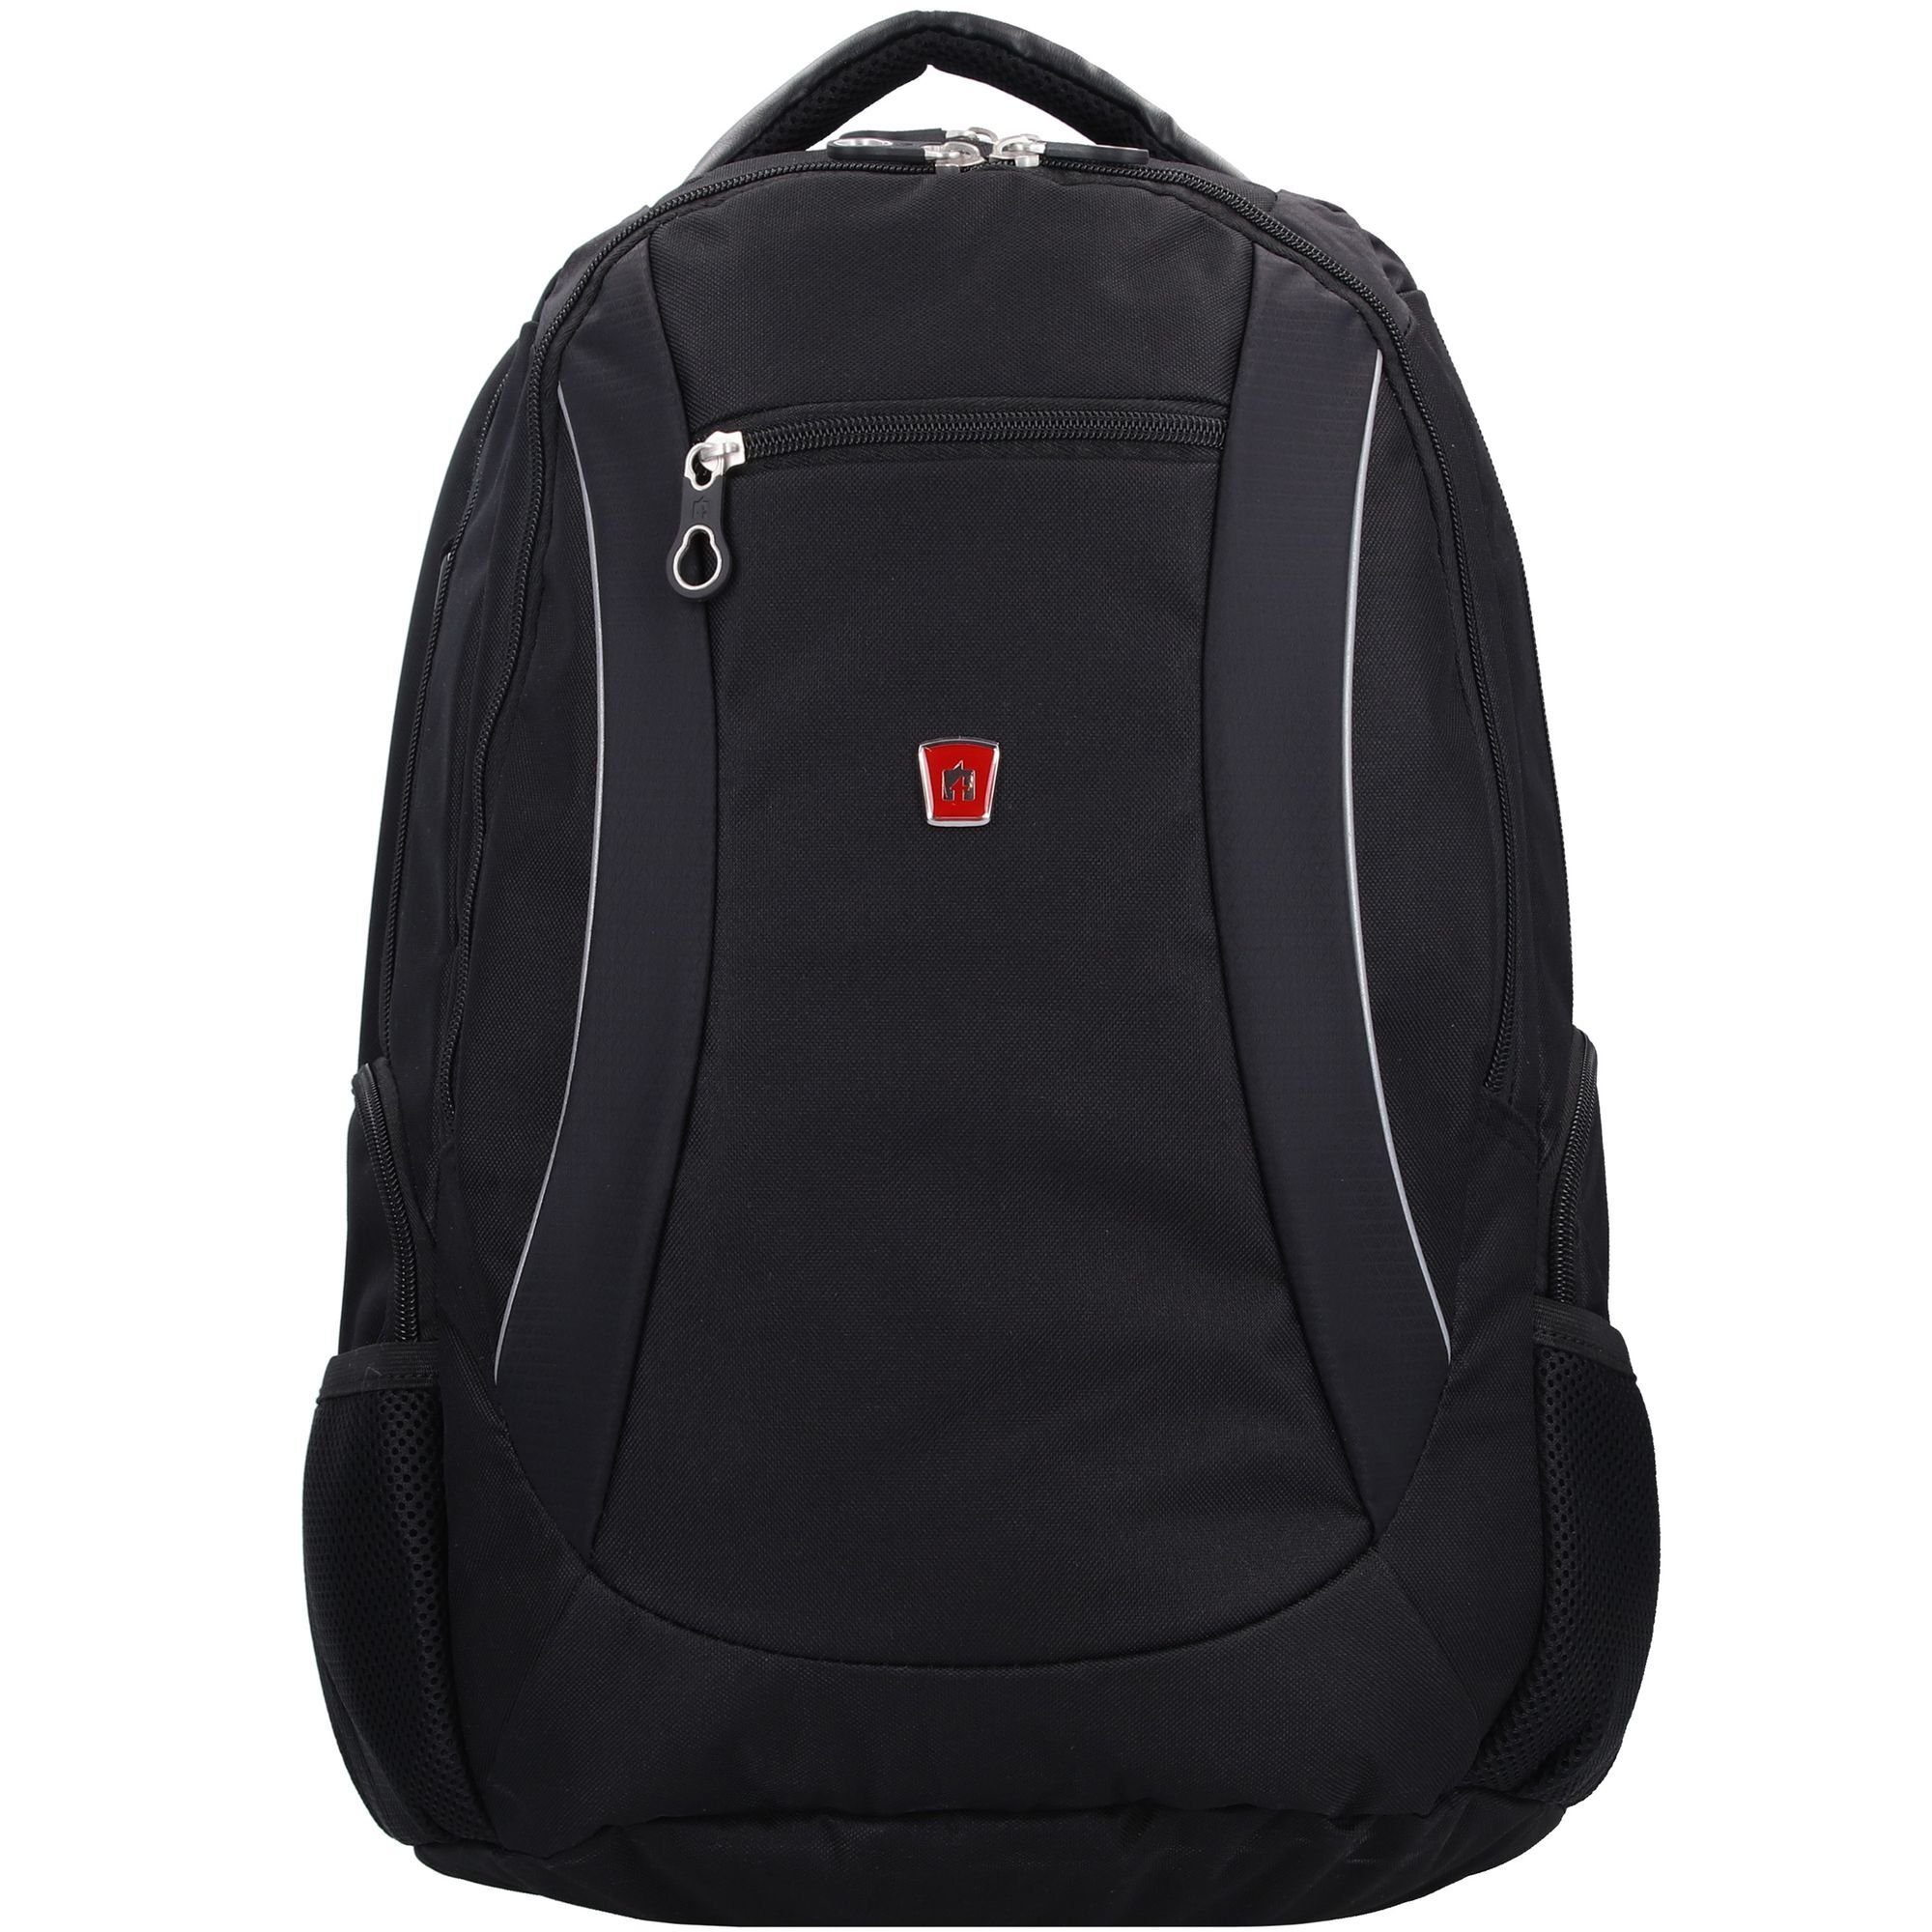 PROfessional, Daypack Traveller Polyester